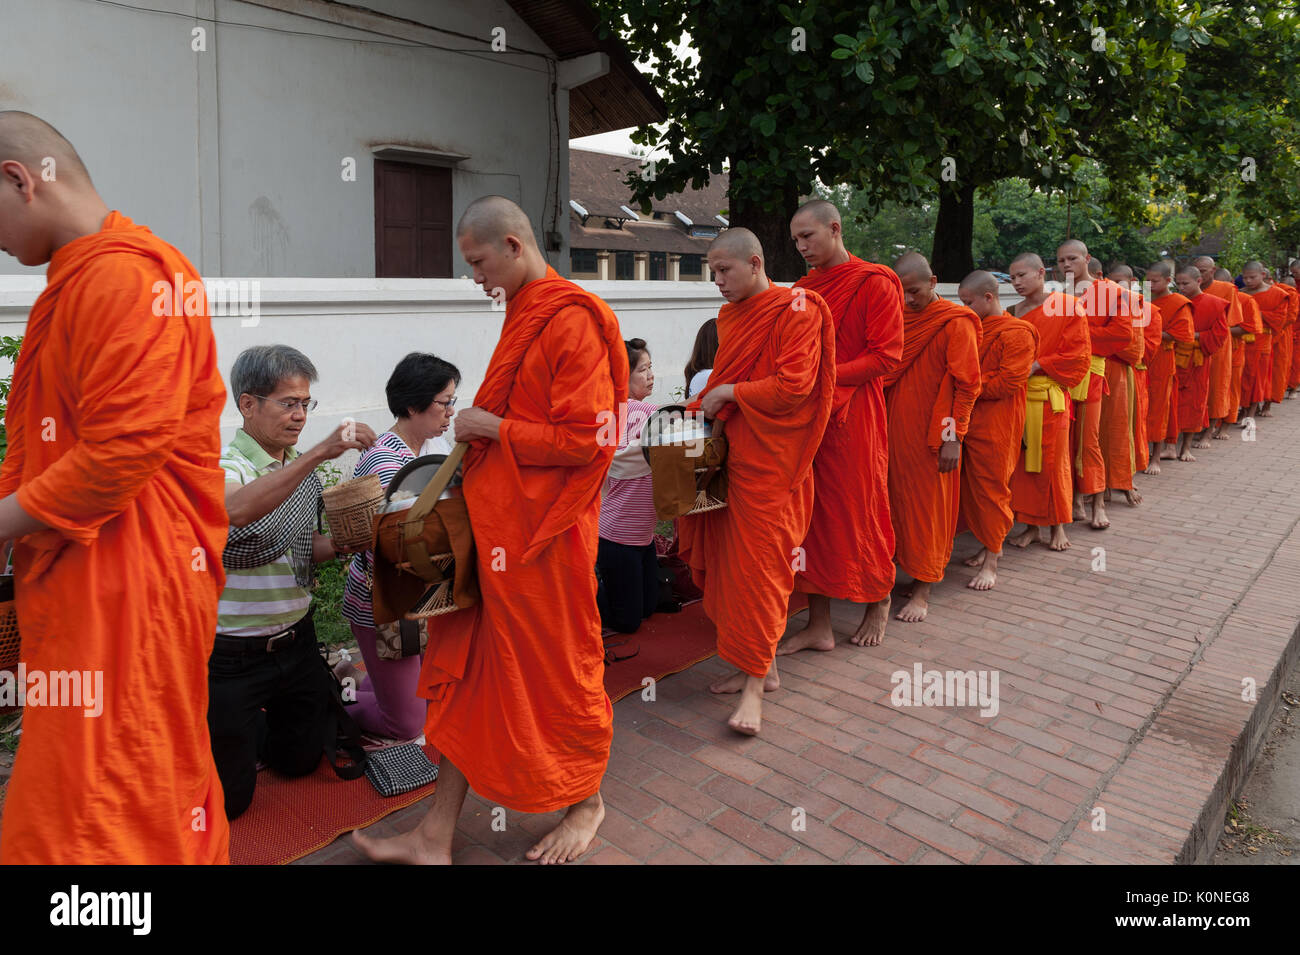 A procession of barefooted monks collects alms along the streets of Luang Prabang, Laos. The most common gifts offered are sticky rice, bananas, sweet Stock Photo